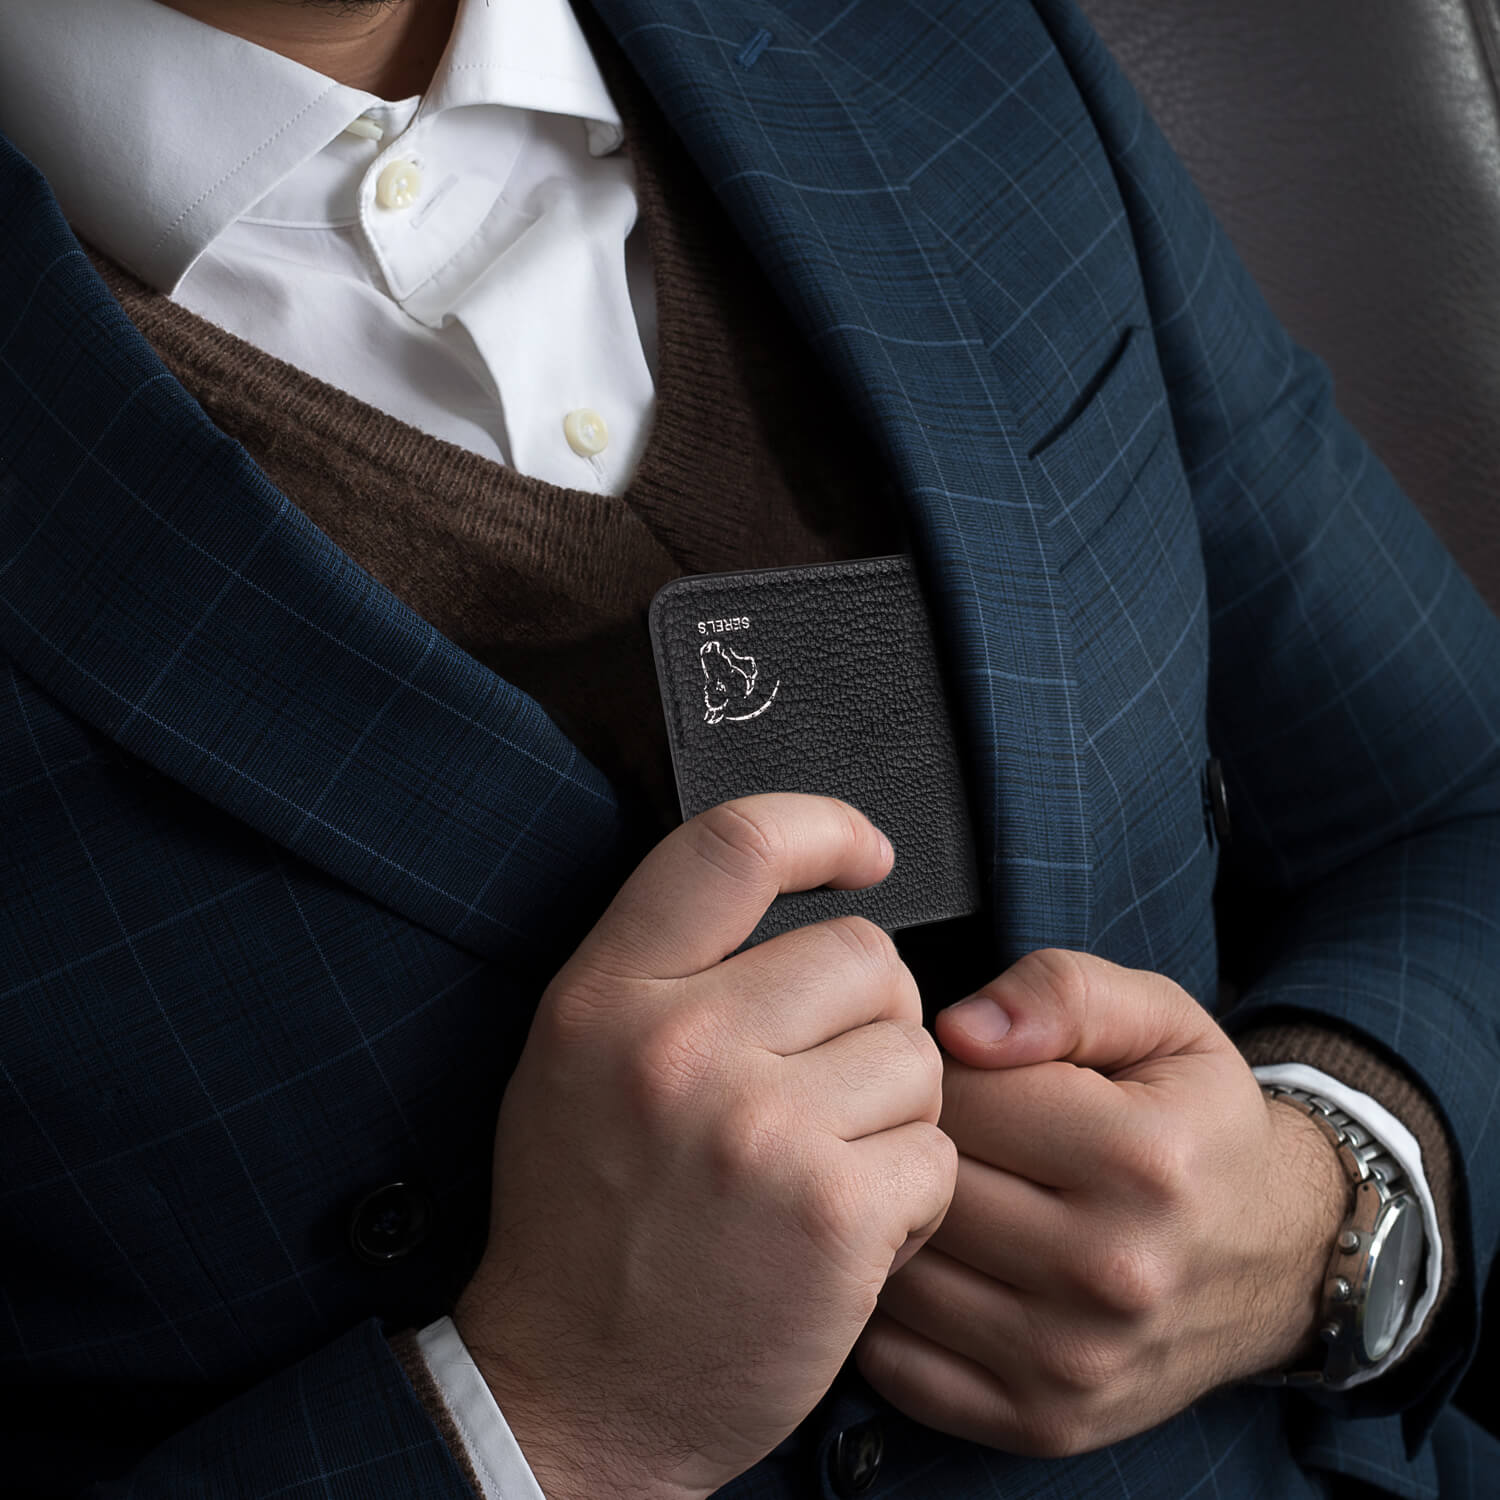 Serel's Classic Wallet Getting into the inside pocket of your jacket